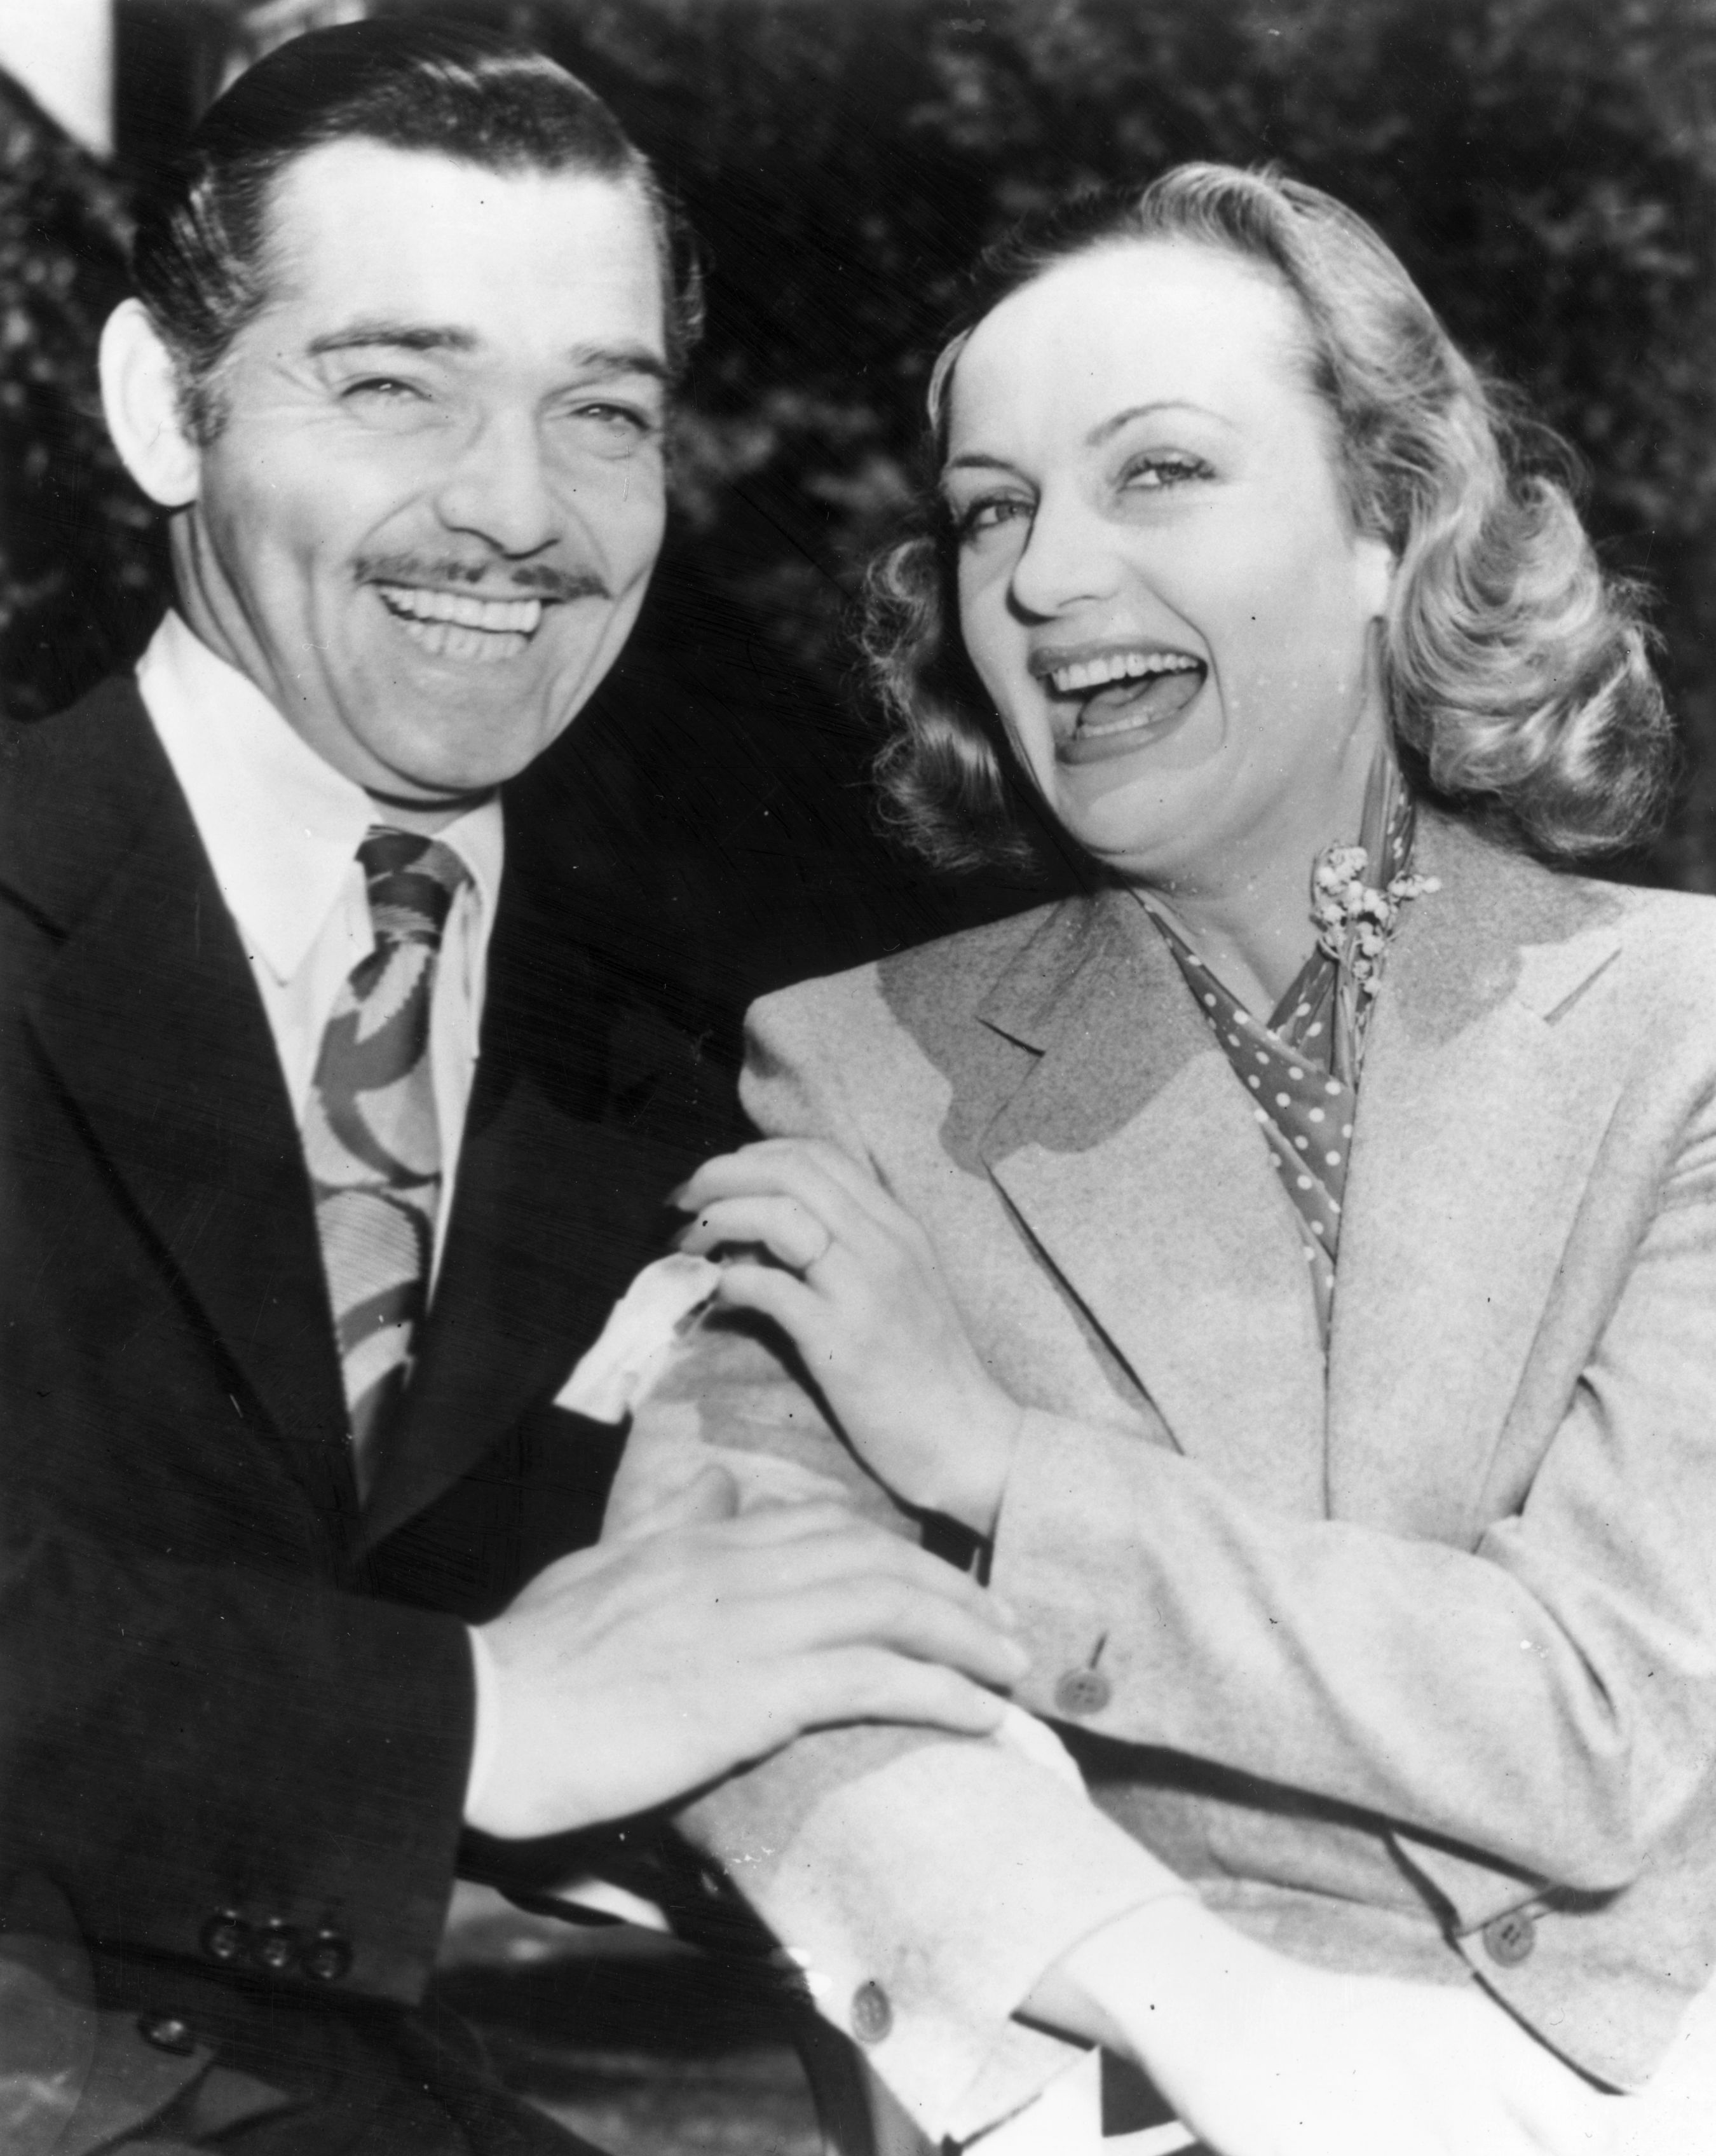 Clark Gable and Carole Lombard after their elopement, February 10, 1939. | Source: Getty Images